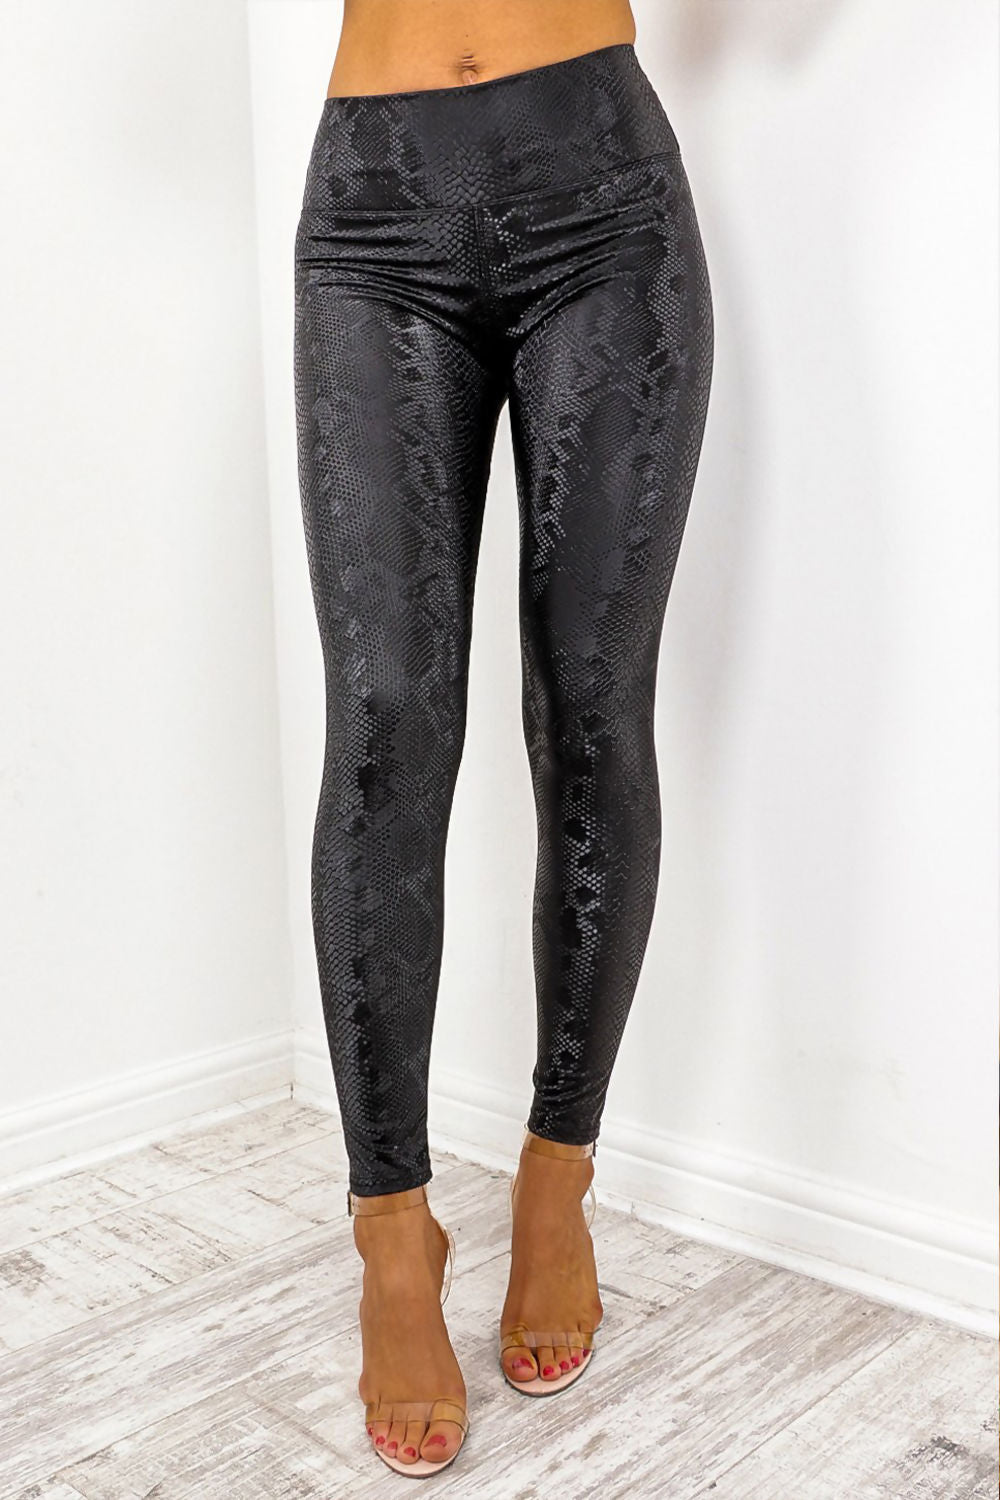 Model wears snake skin leggings with high waisted panelling. The snake skin pattern is visisble. Models stands facing the camera with her legs slightly apart. 